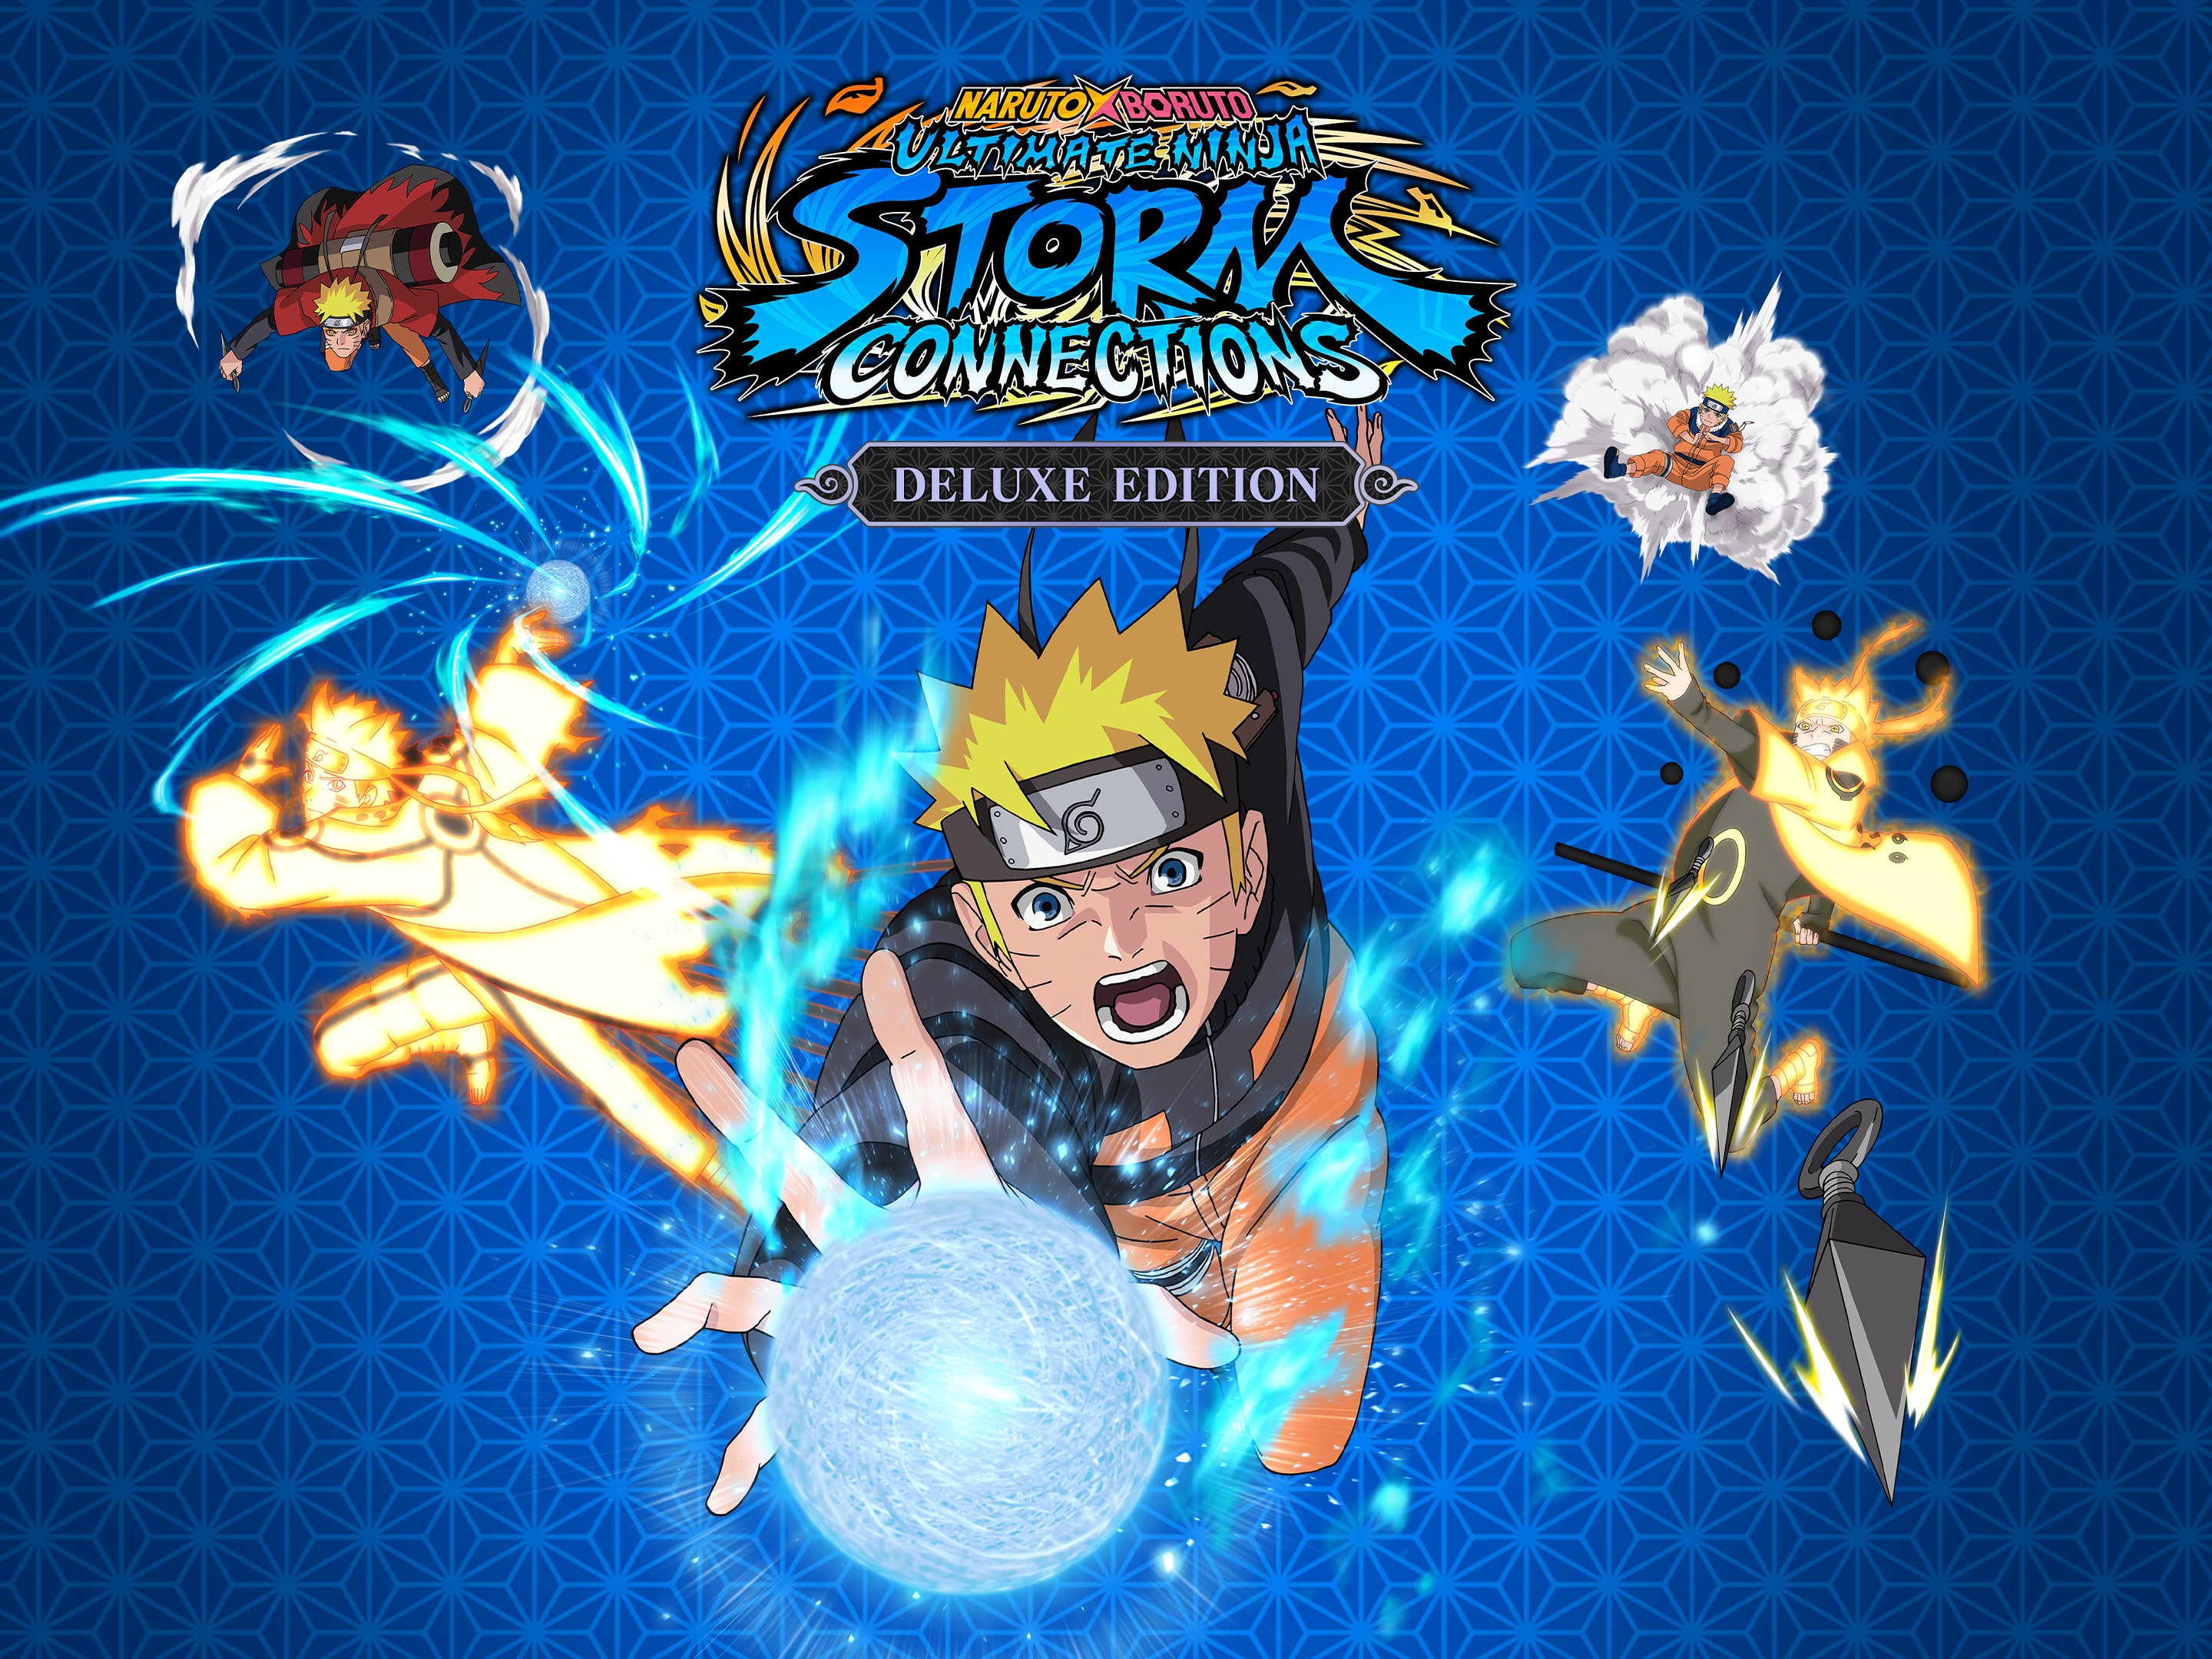 Abdul Zoldyck on X: Naruto x Boruto Ultimate Ninja Storm Connections Game  Cover art for PlayStation and Nintendo Switch. Pre-order now available;    / X